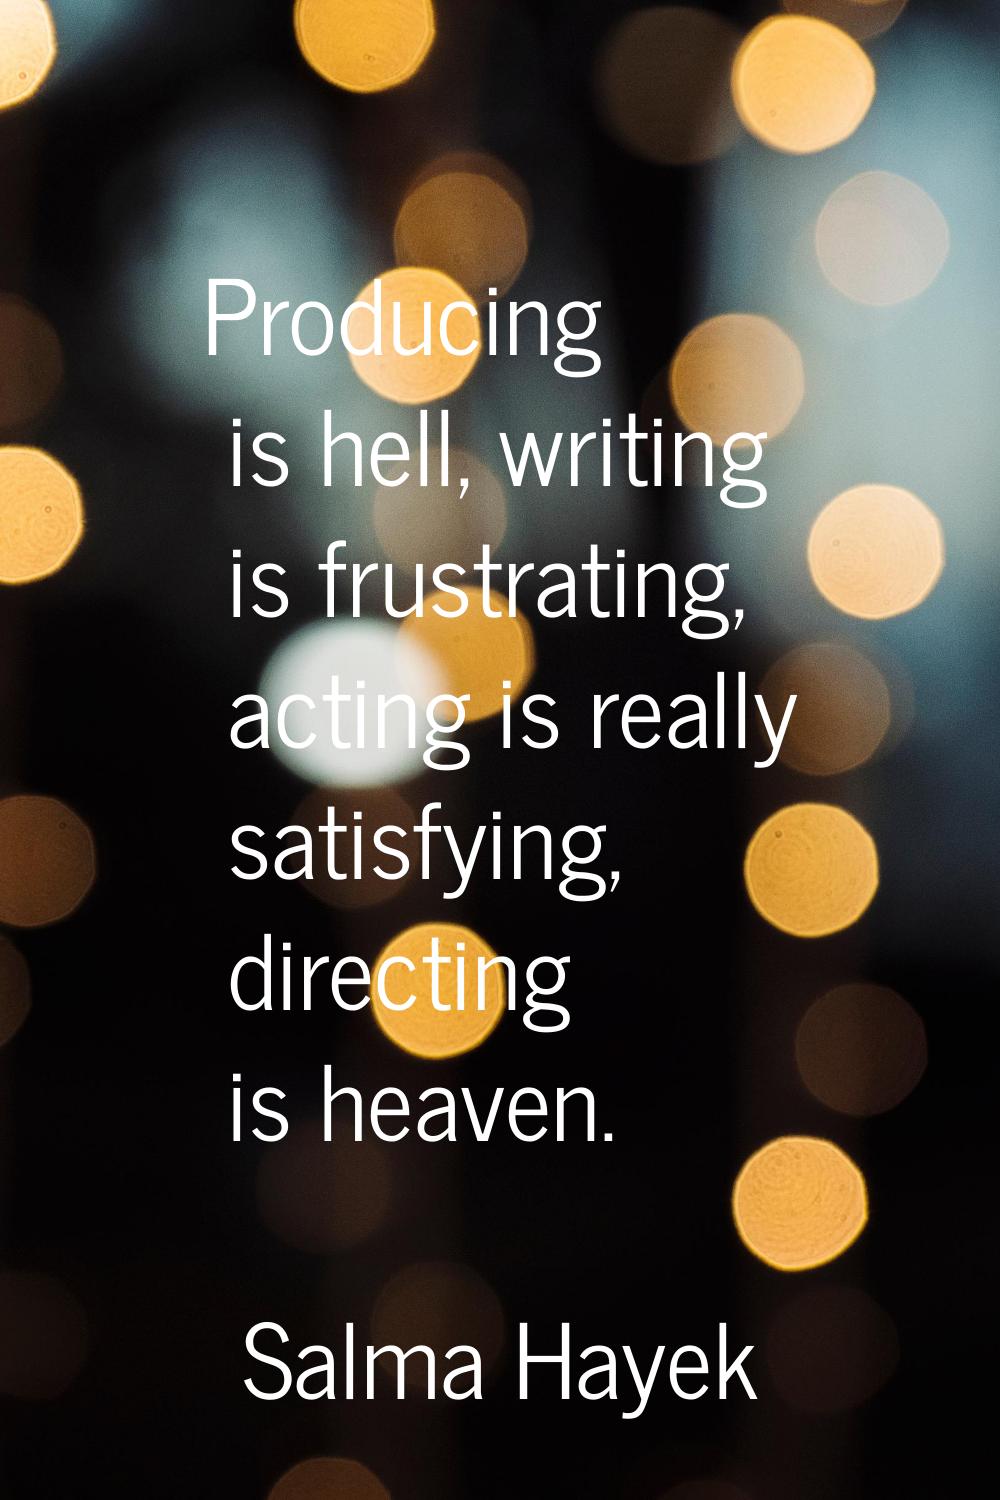 Producing is hell, writing is frustrating, acting is really satisfying, directing is heaven.